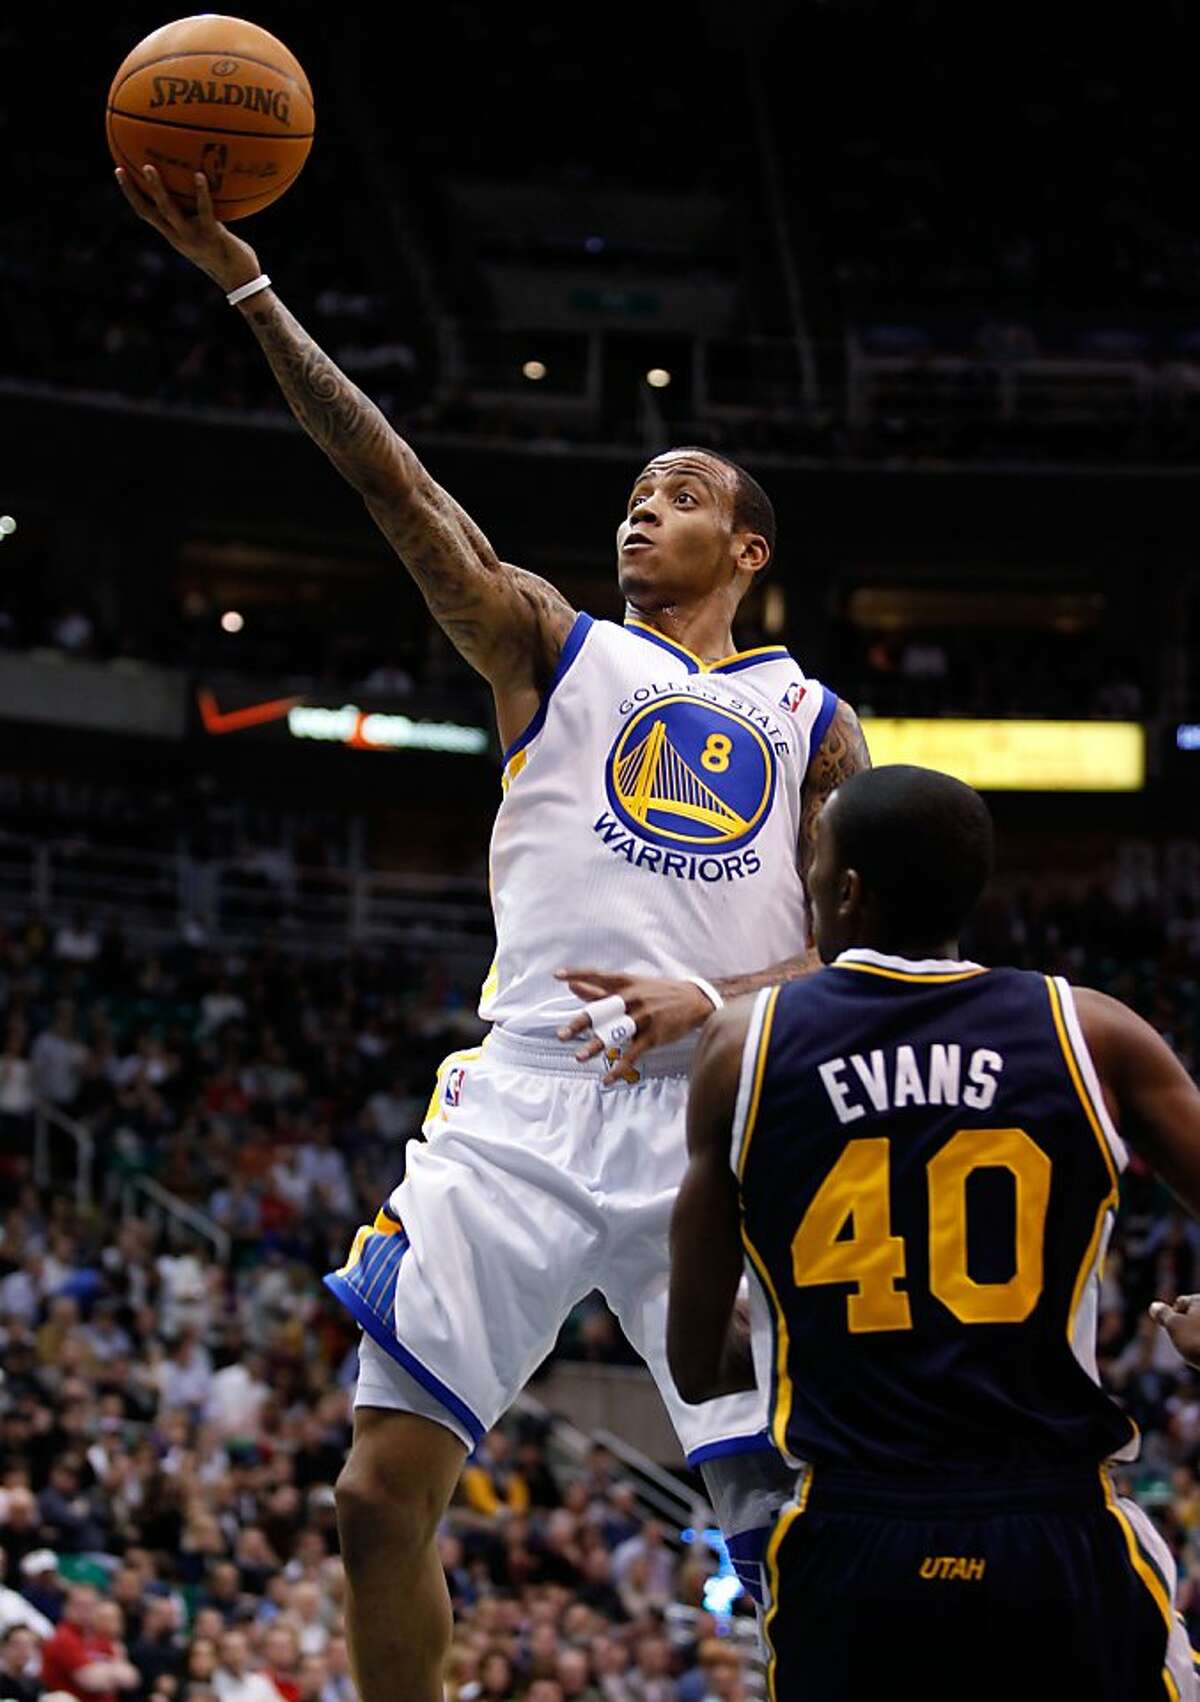 Golden State Warriors guard Monta Ellis (8) goes up for a shot against Utah Jazz forward Jeremy Evans (40) during the first half of an NBA basketball game in Salt Lake City, Wednesday, Feb. 16, 2011. (AP Photo/Steve C. Wilson) Ran on: 02-17-2011 Monta Ellis went 16-for-25 from the floor as he scored 35 points. Ellis also collected seven assists. Ran on: 02-17-2011 Monta Ellis went 16-for-25 from the floor as he scored 35 points. Ellis also collected seven assists.